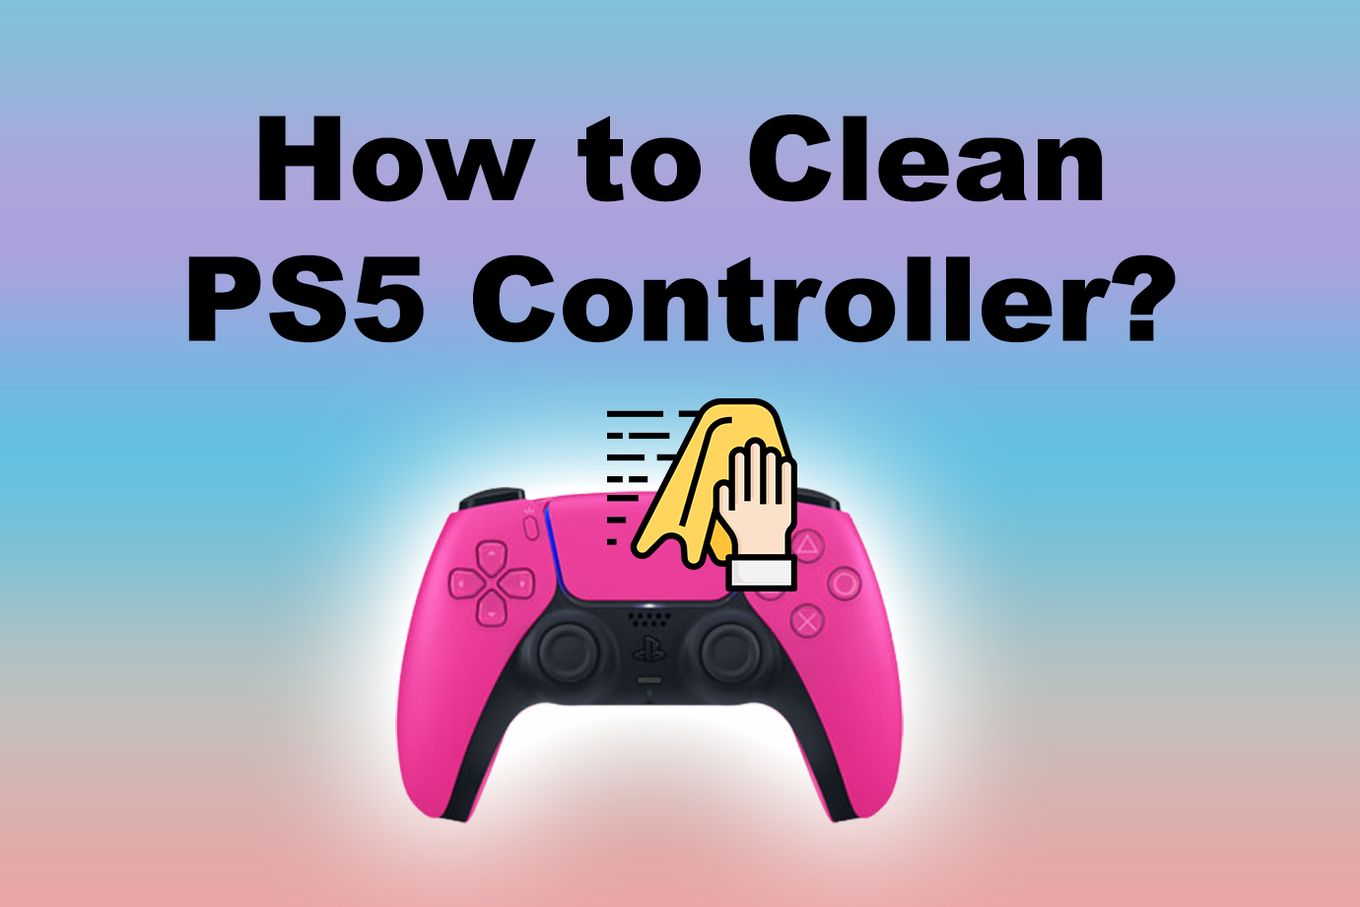 How To Clean PS5 Controller